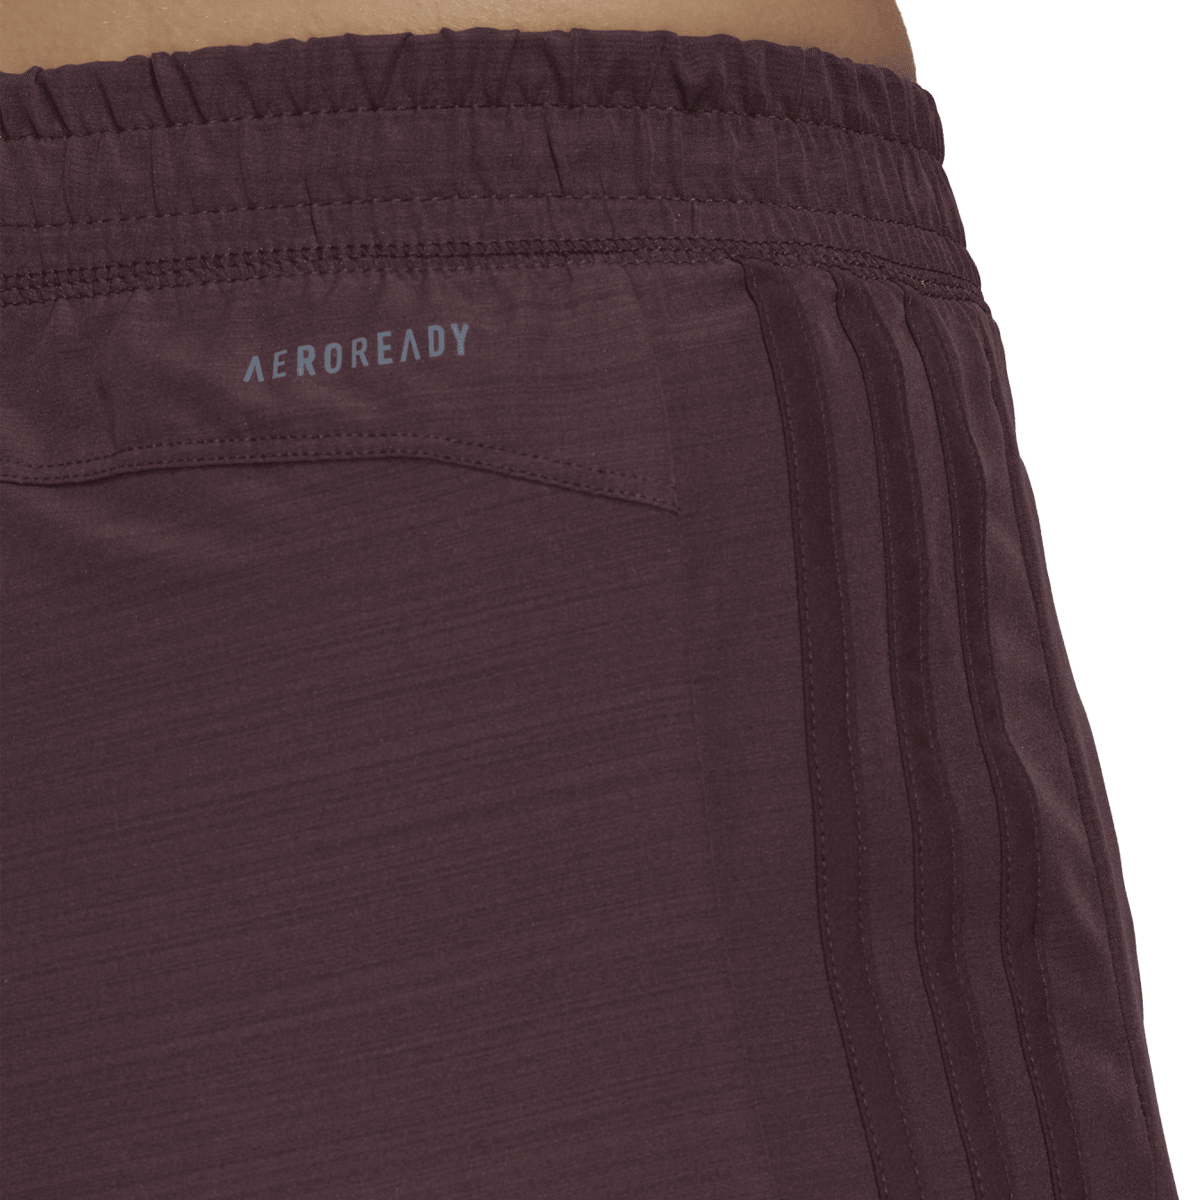 Women's Heather Woven Pacer Shorts alternate view